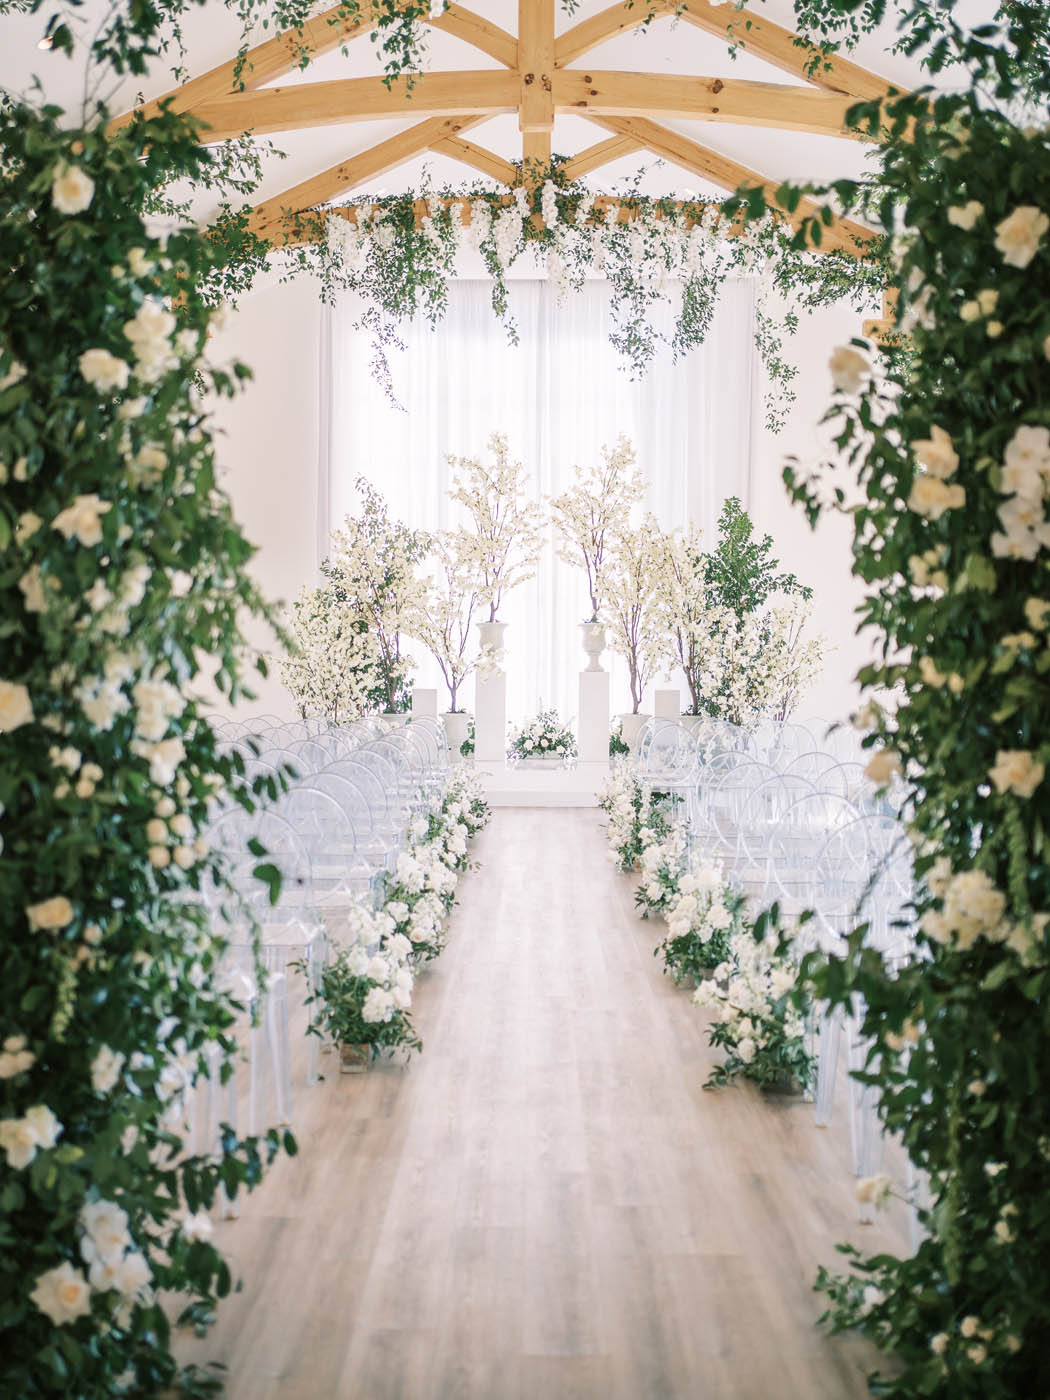 the epic ceremony decor with white indoor trees and bushels of greenery